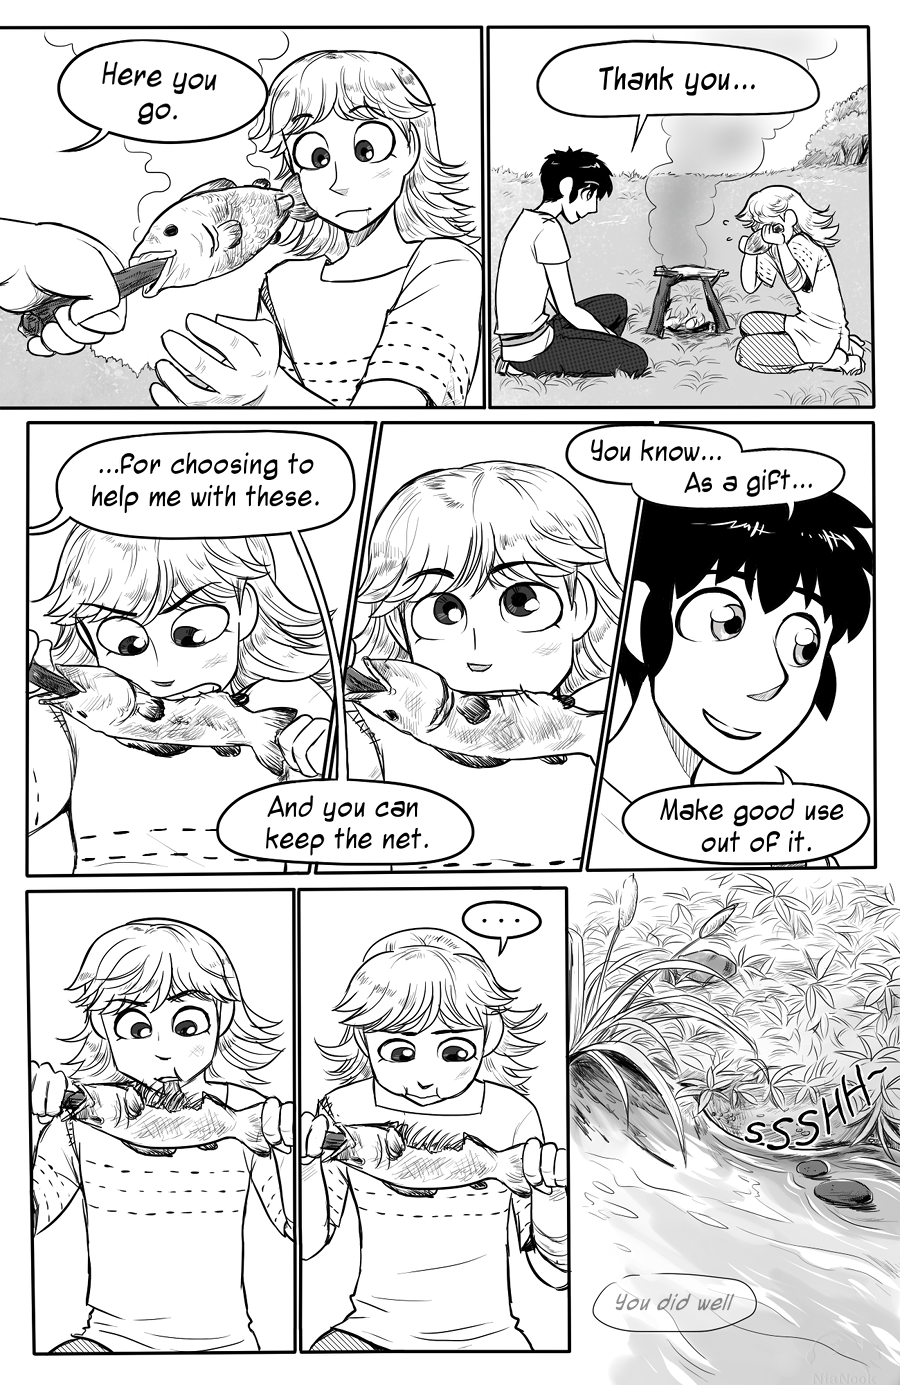 Page 29 (Book 4)